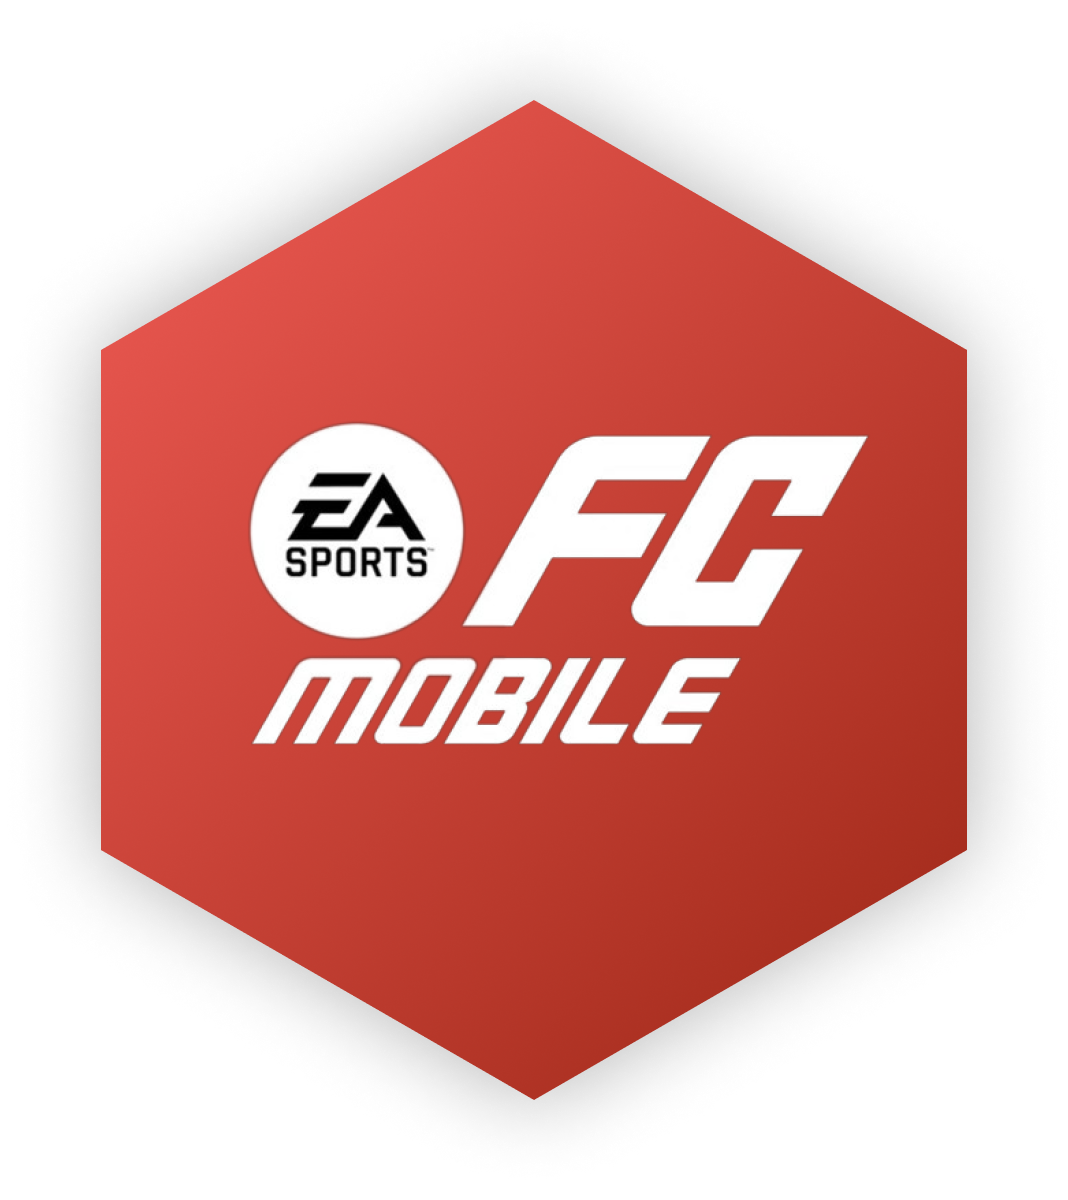 Join A1 Gaming Weekend FIFA Mobile Tournament! » A1 Adria League